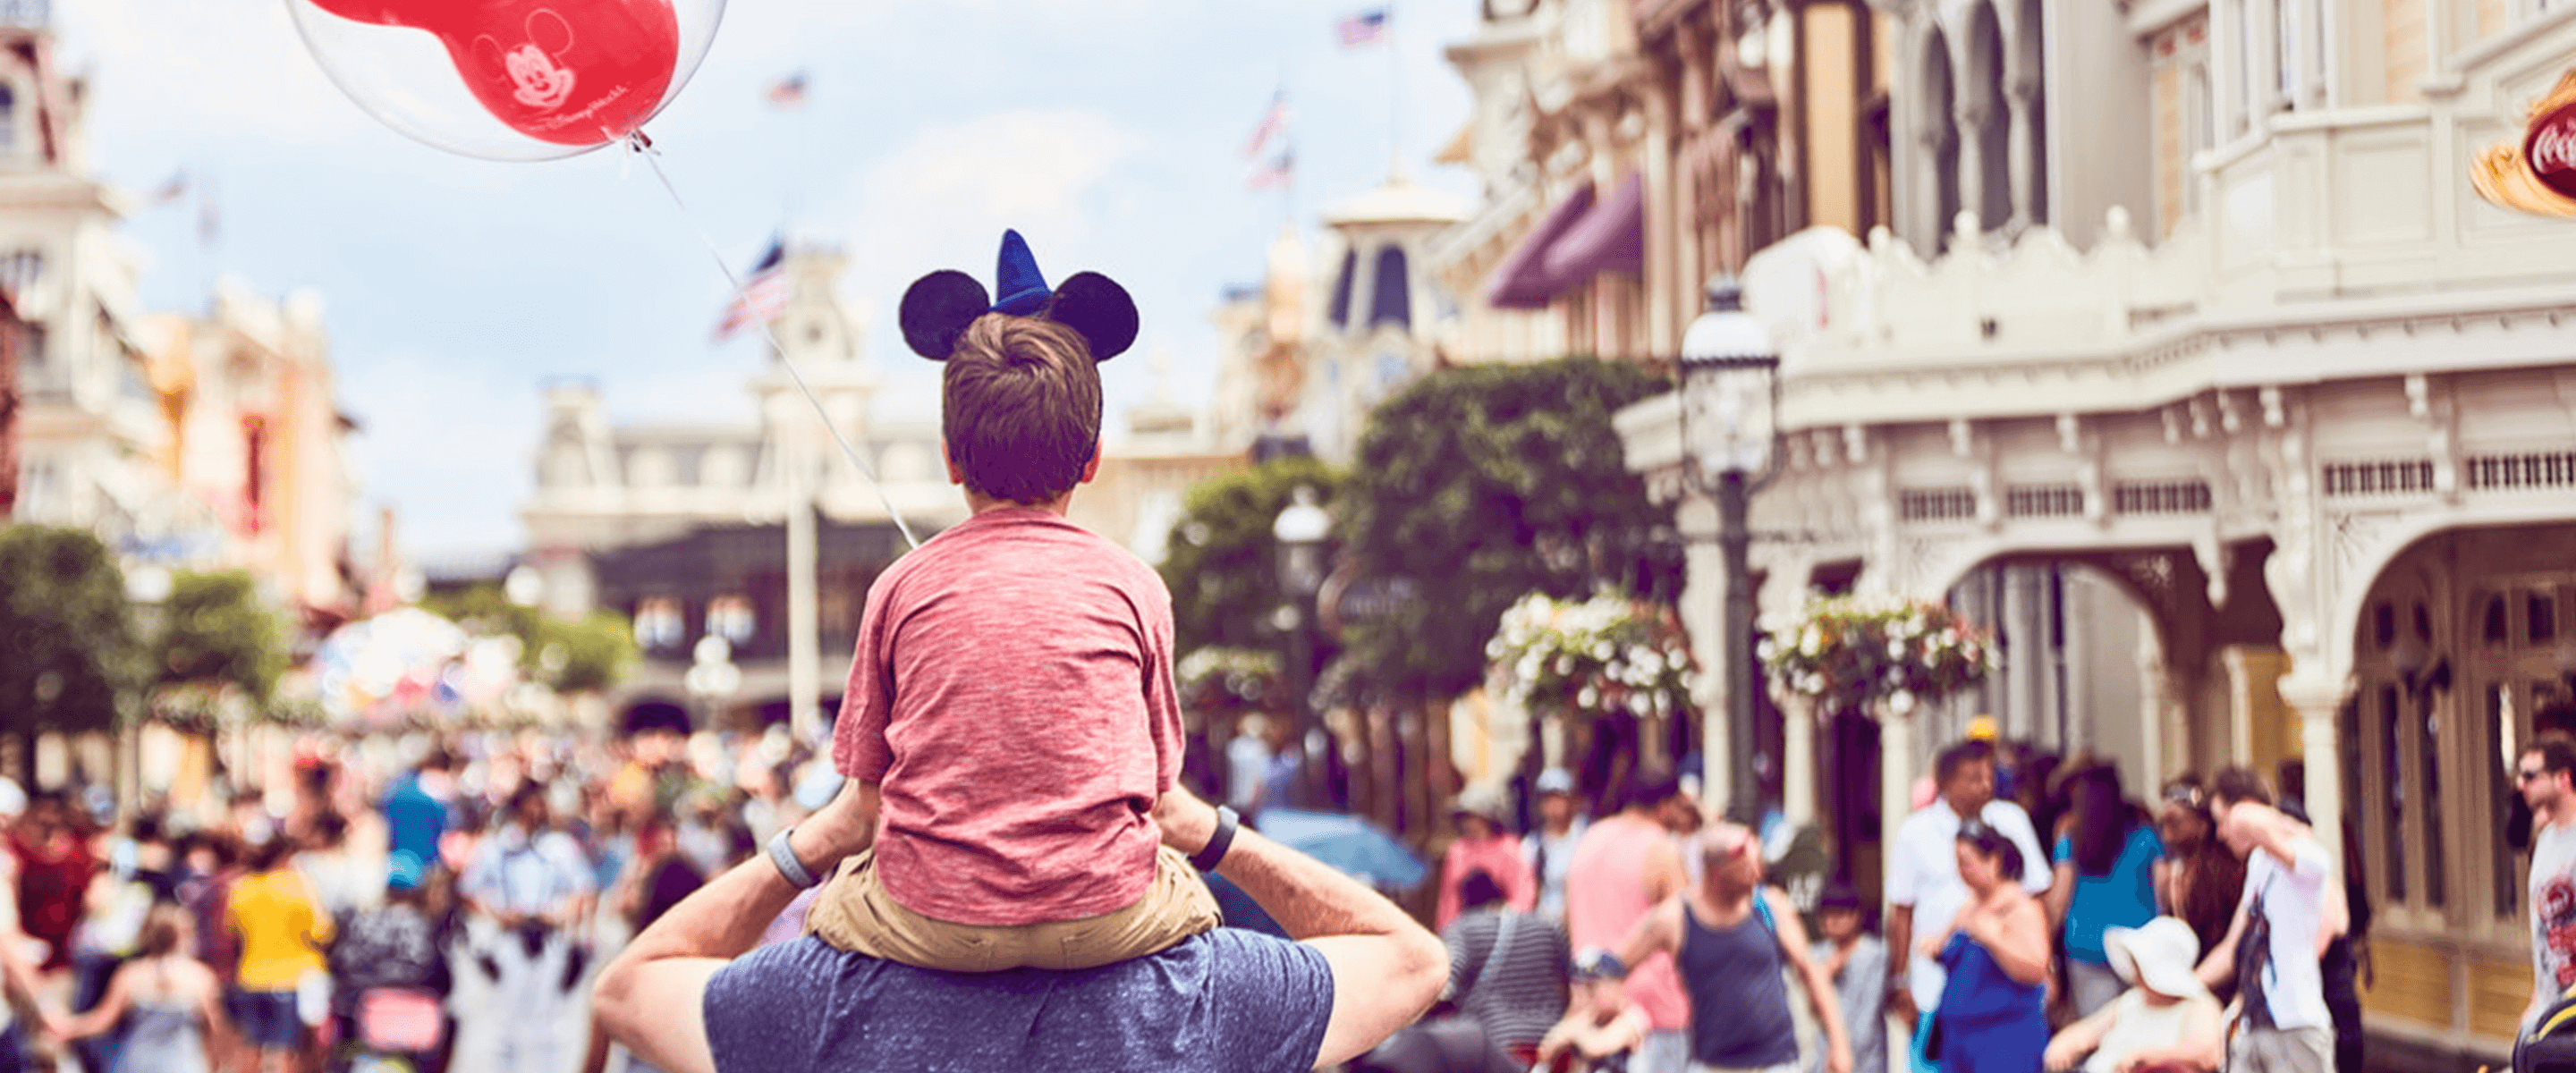 A child sitting on their parent's shoulders wearing Mickey Mouse ears at Walt Disney World Florida